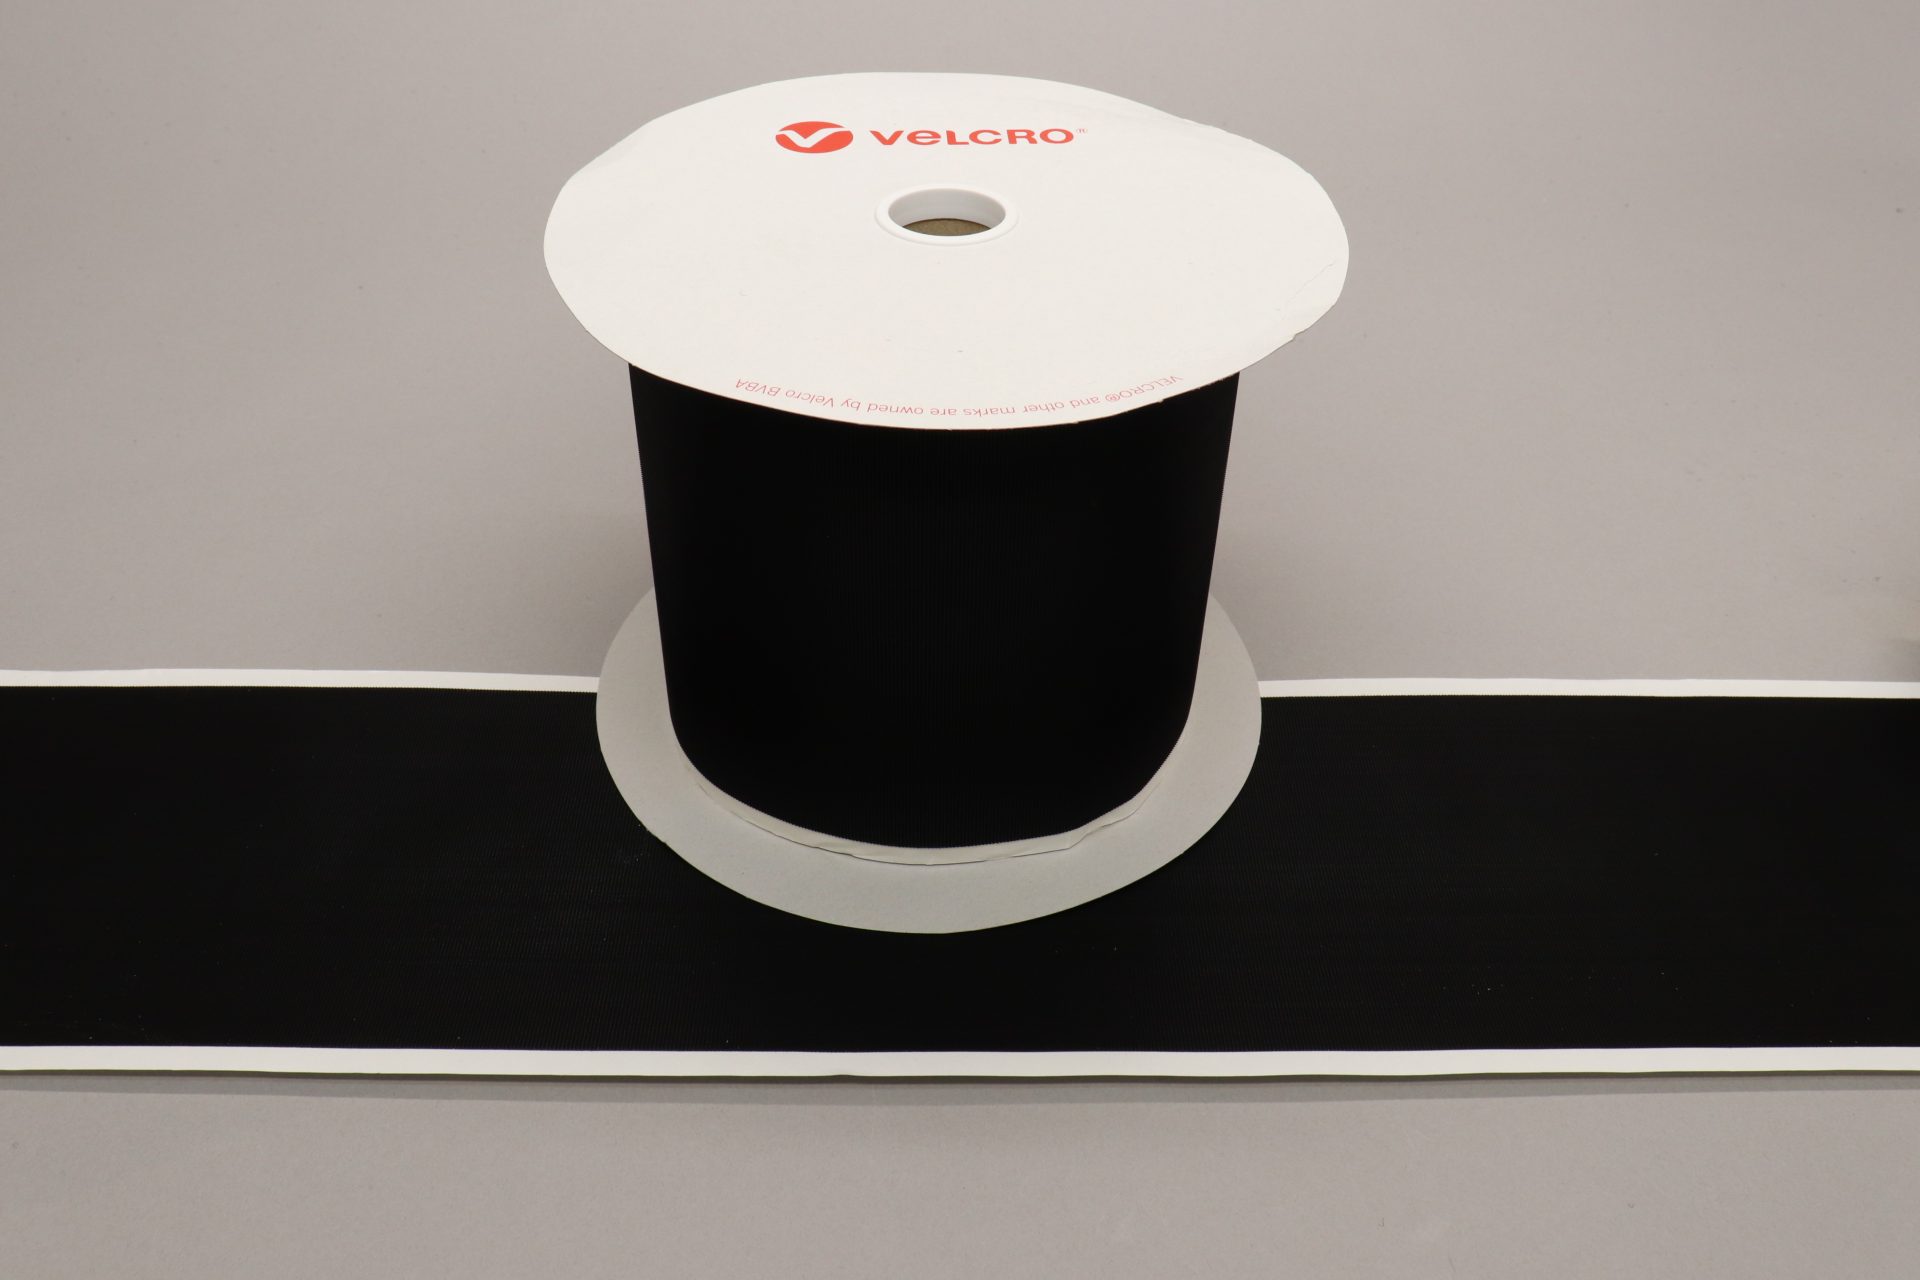 VELCRO® Brand PS30 Stick-on 150mm tape BLACK HTH830 low profile HOOK 25mtr roll